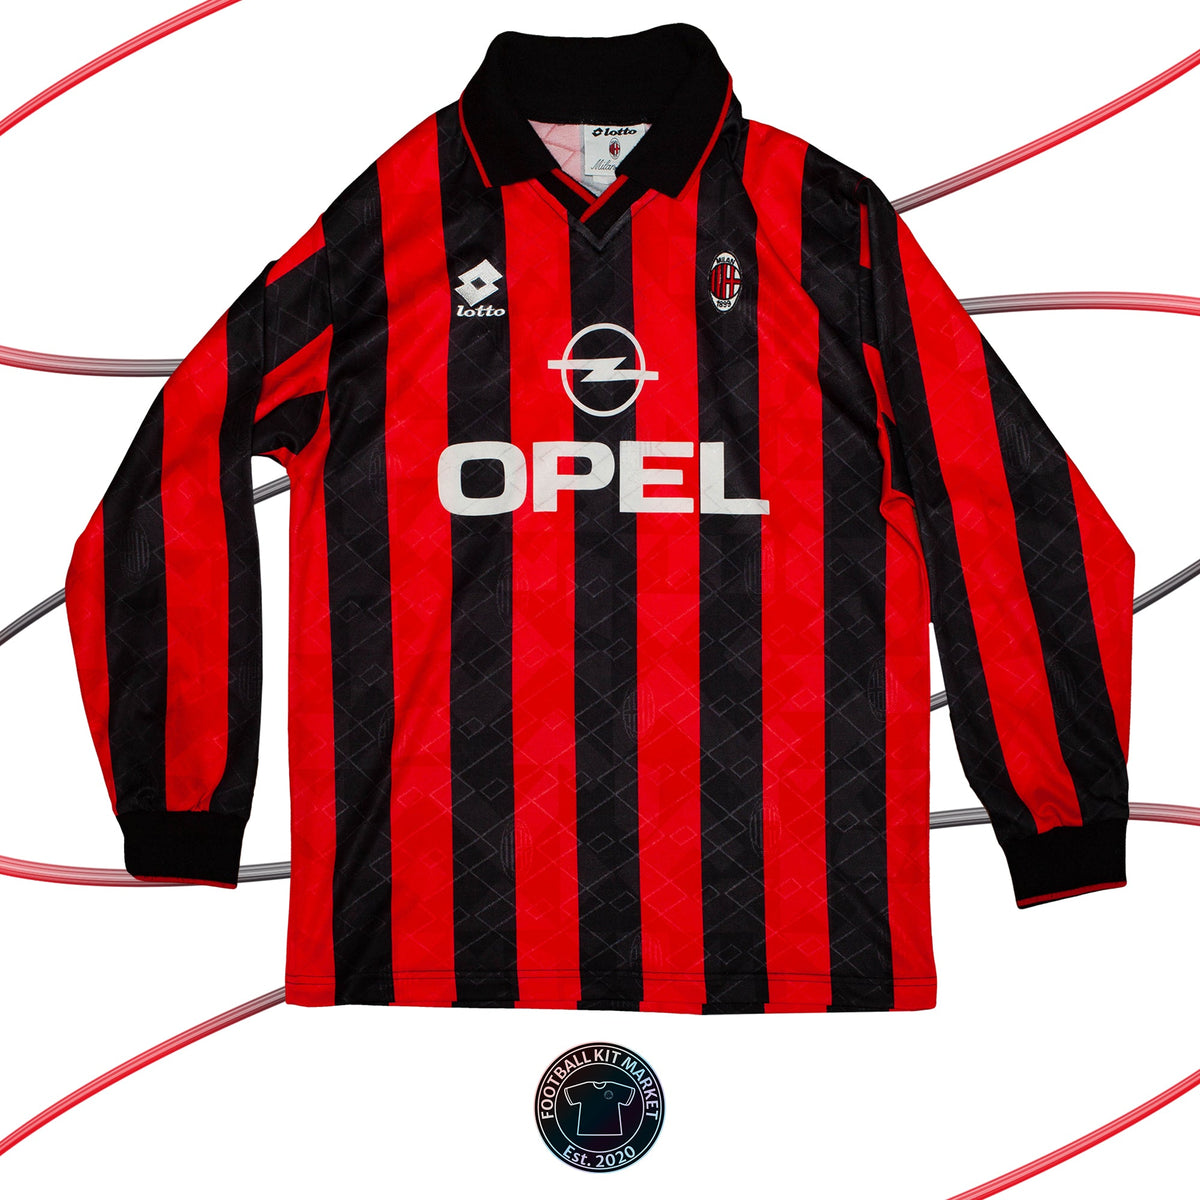 Genuine AC MILAN Home (1995-1996) - LOTTO (L) - Product Image from Football Kit Market